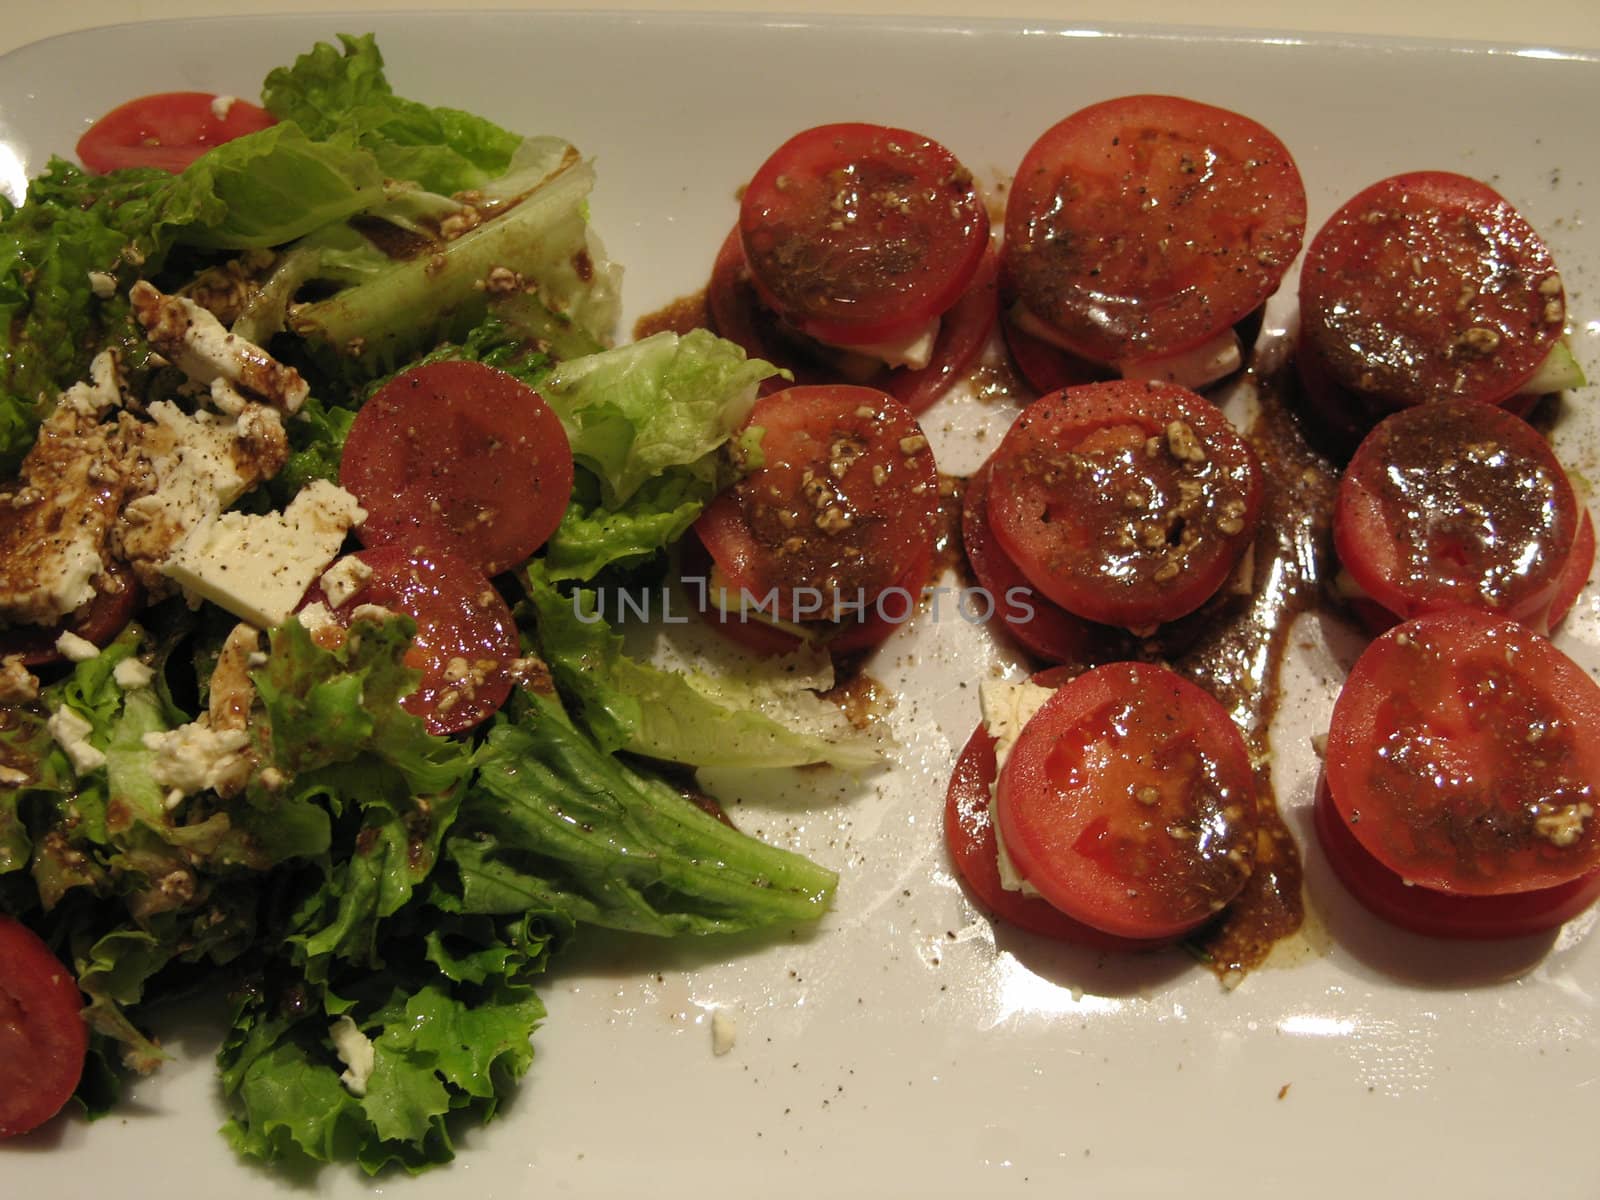 tomato dish and salad by mmm